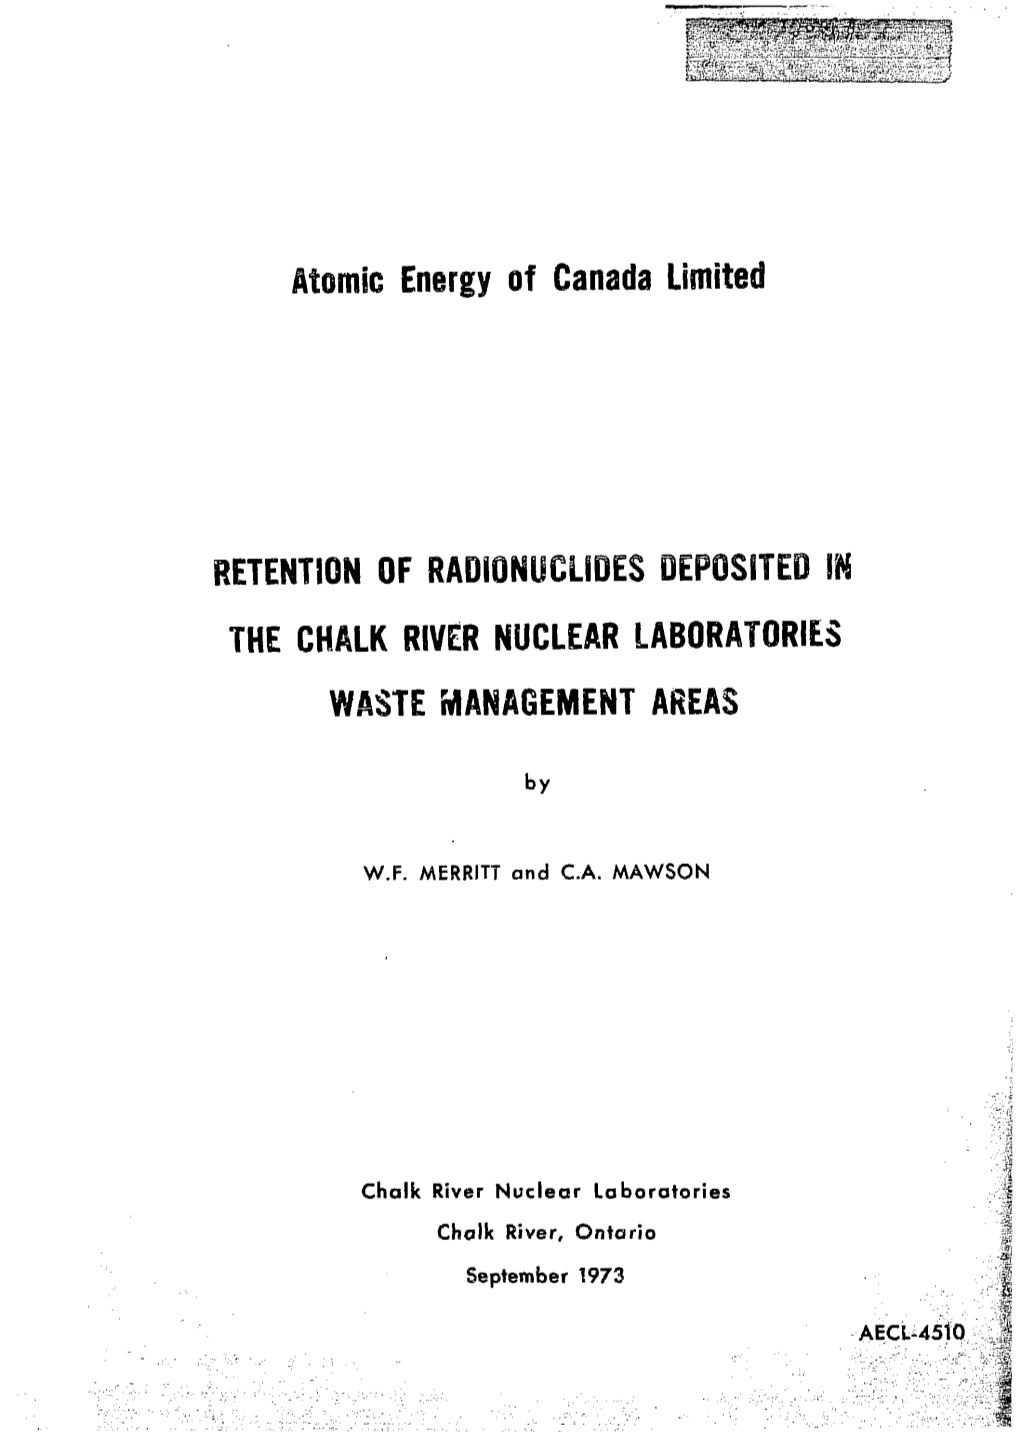 Ft the CHALK RIVER NUCLEAR LABORATORIES WASTE MANAGEMENT AREAS